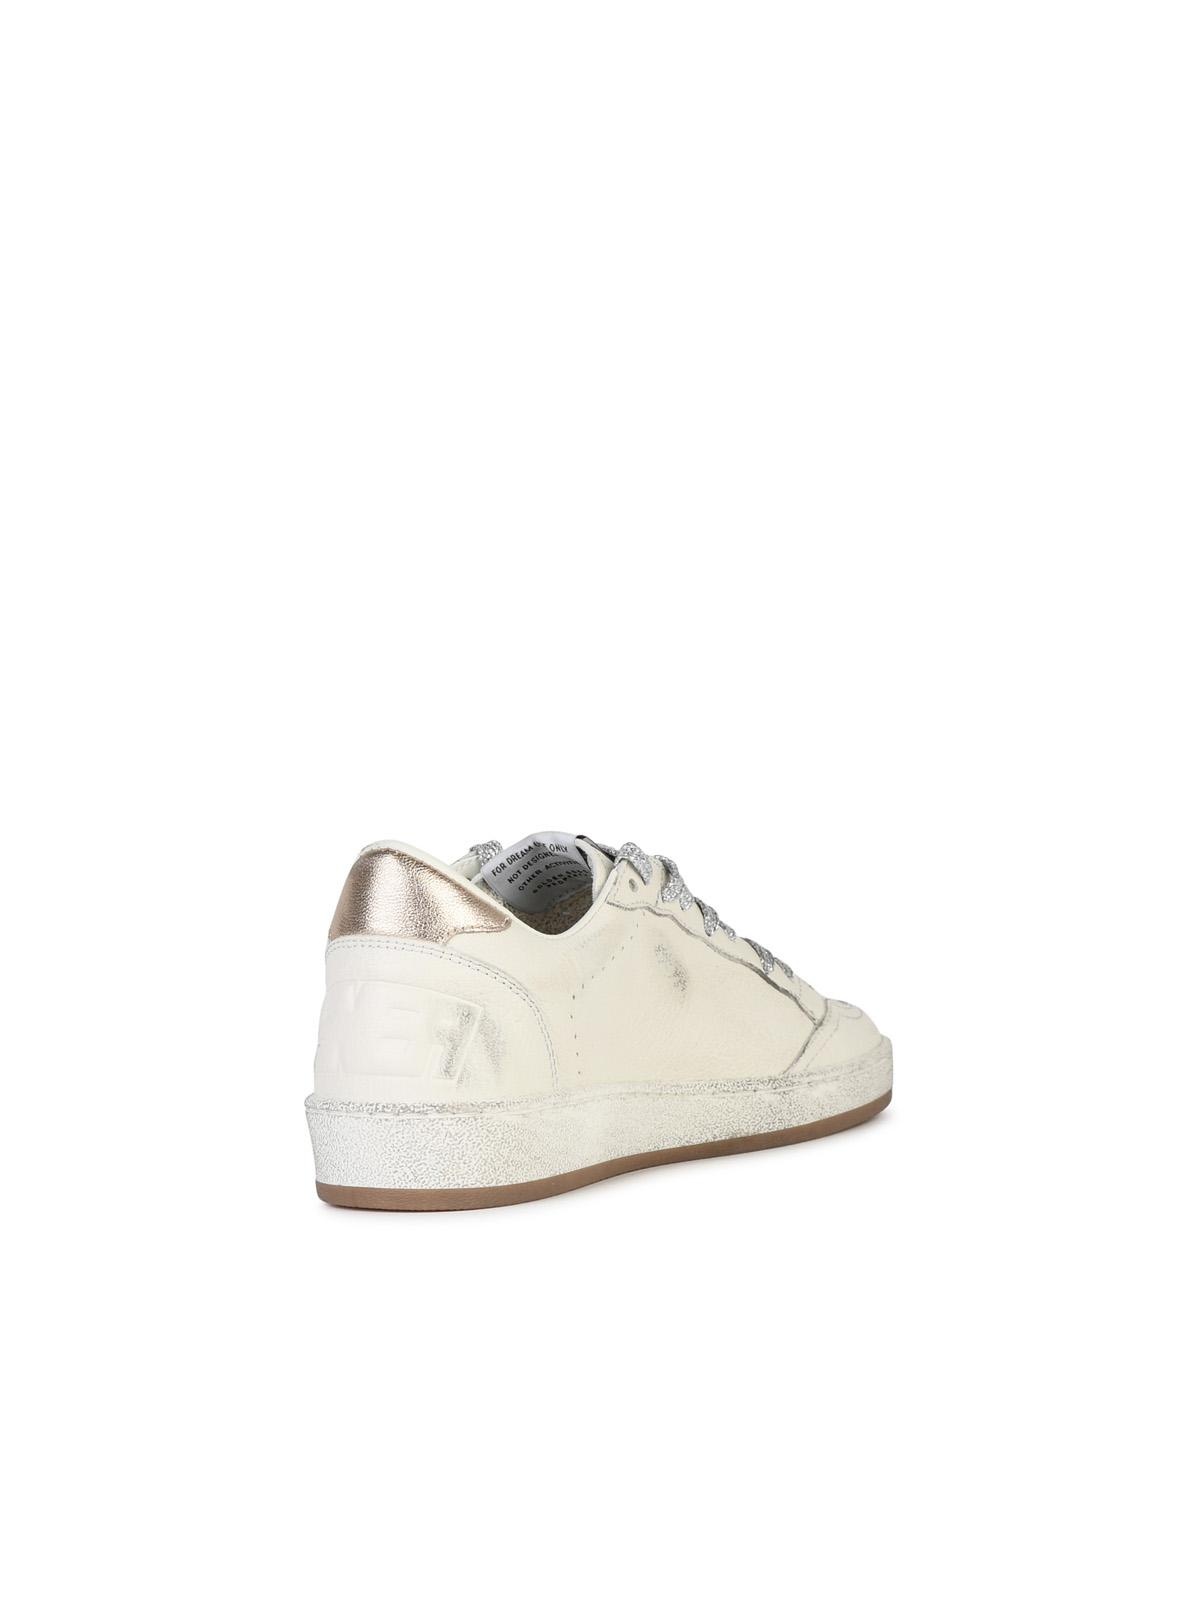 Golden Goose 'Ball Star' White Leather Sneakers Woman - 3